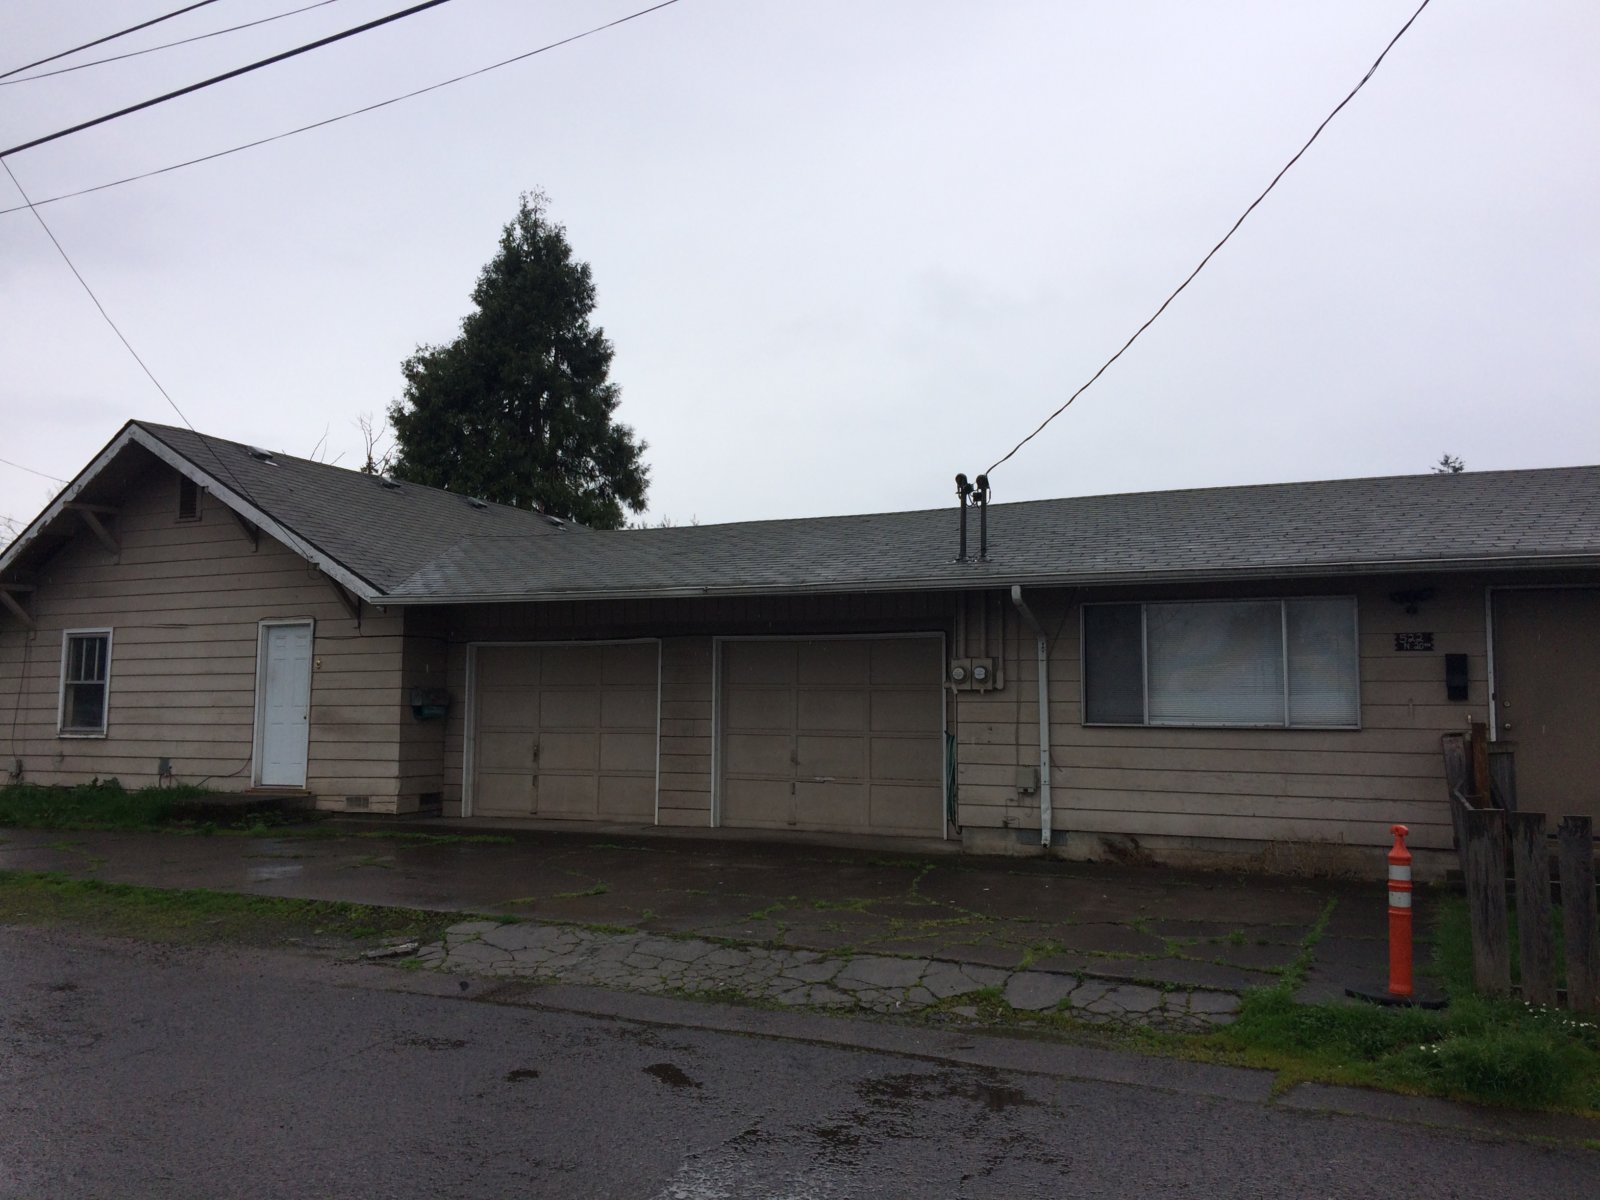 Newly Acquired Duplex in the affordable housing area of Springfield, Oregon is not ready for market yet.